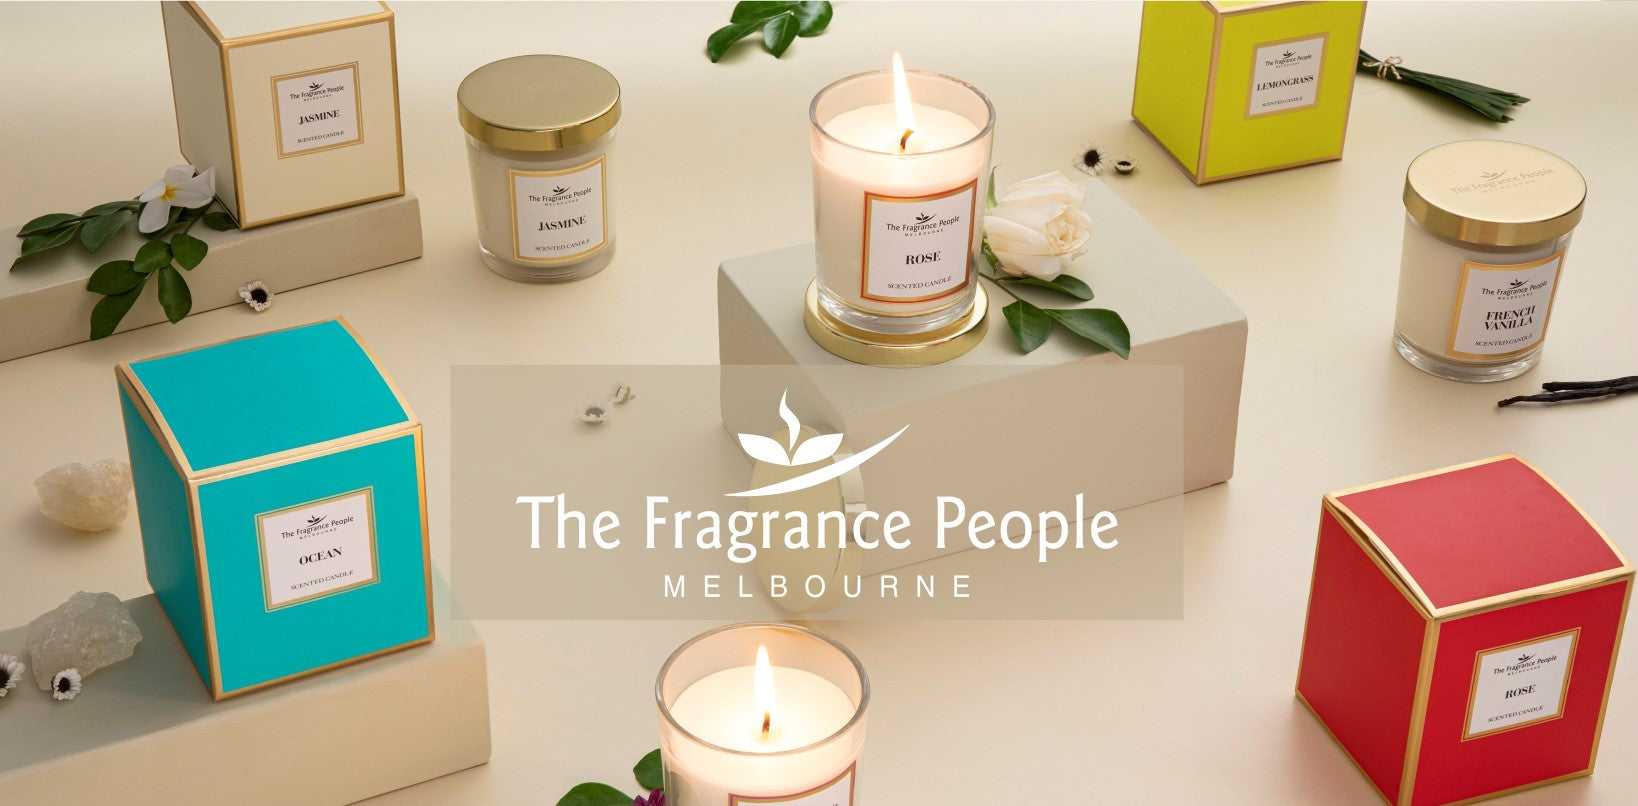 Home Sweet Home: Using Fragrances to Create a Warm and Inviting Atmosphere